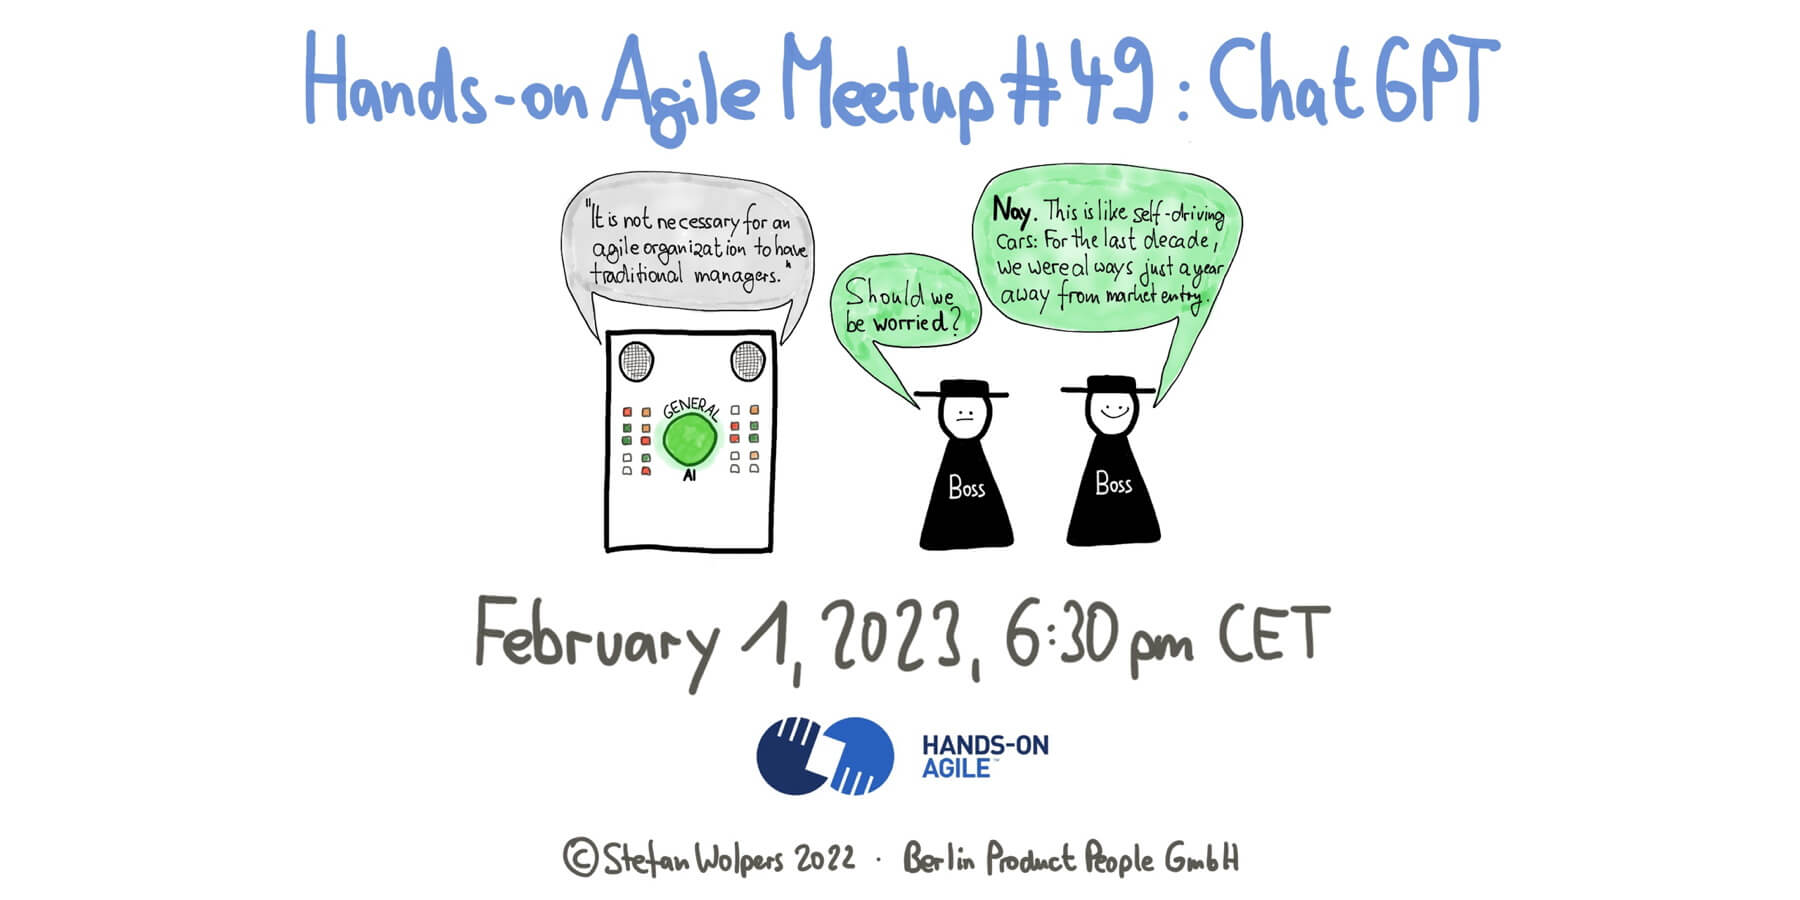 Hands-on Agile 49: ChatGPT — Age-of-Product.com